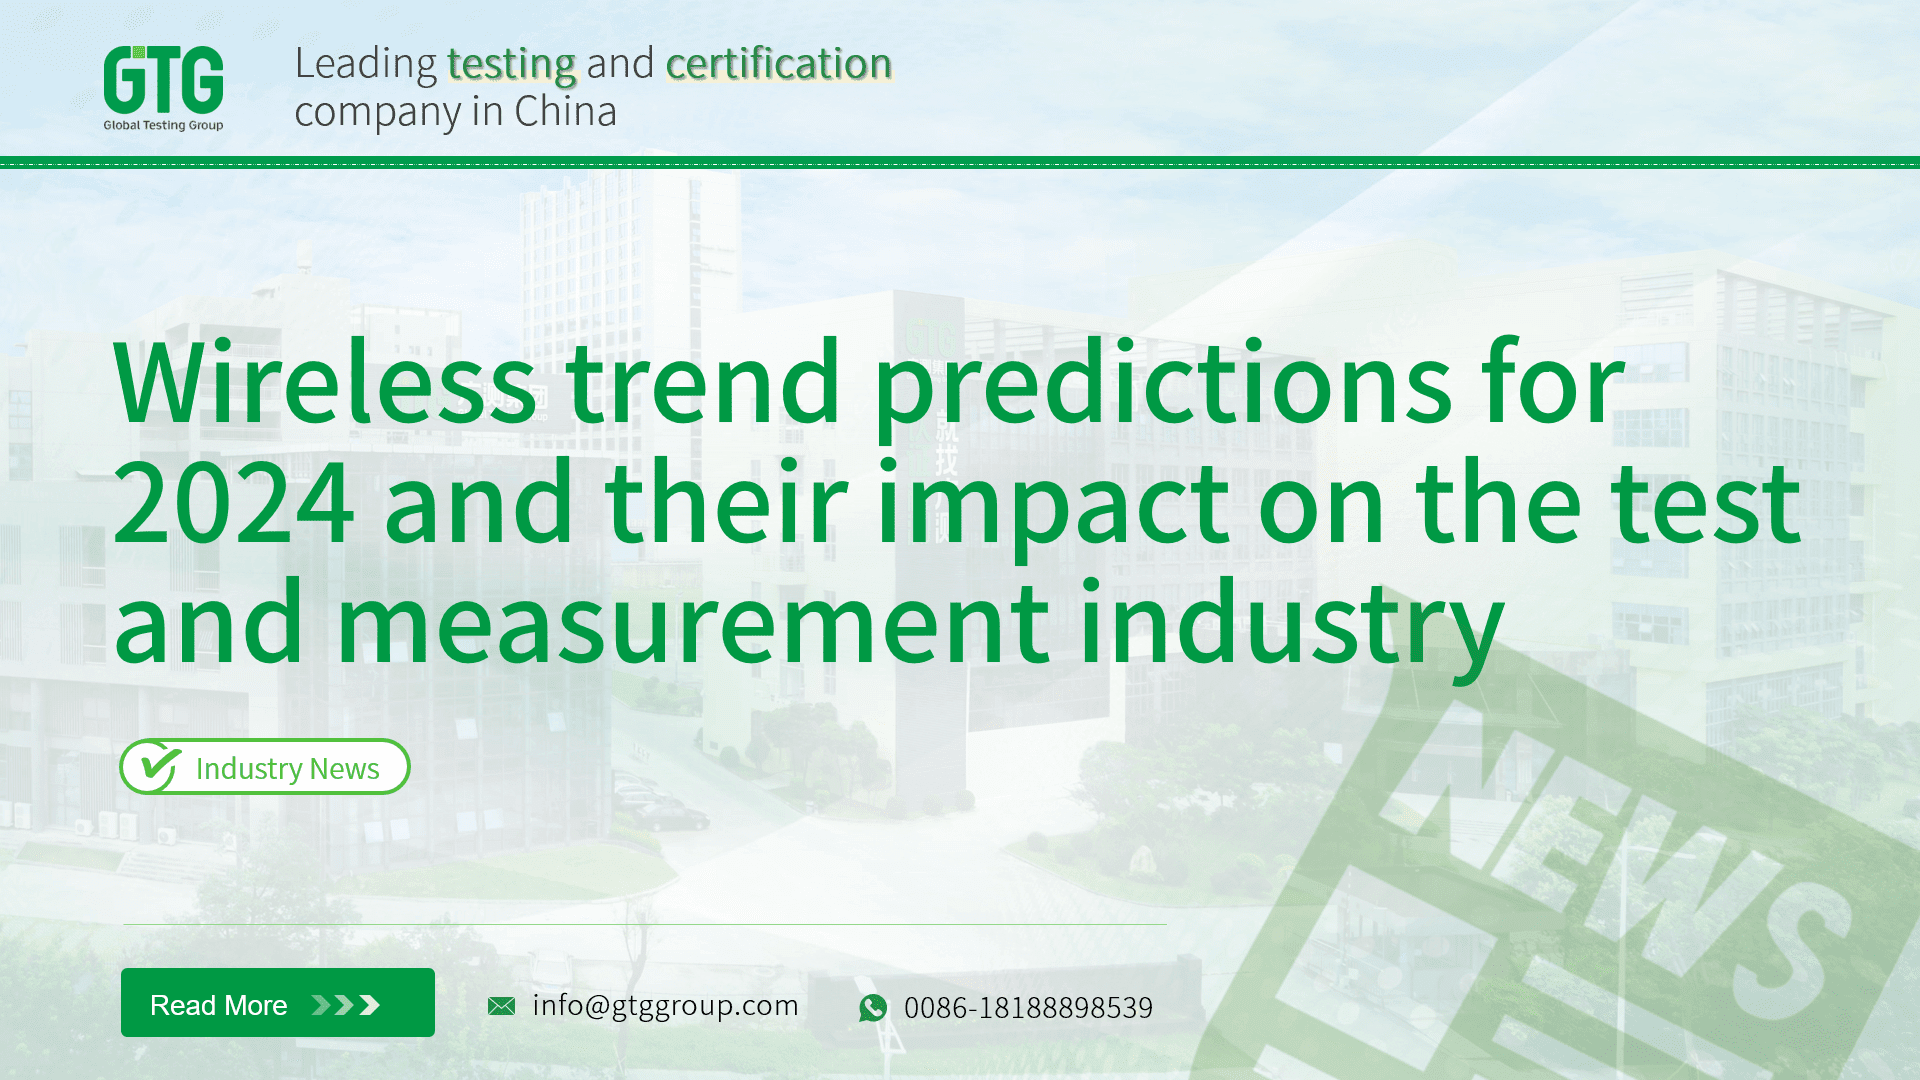 Wireless trend predictions for 2024 and their impact on the test and measurement industry